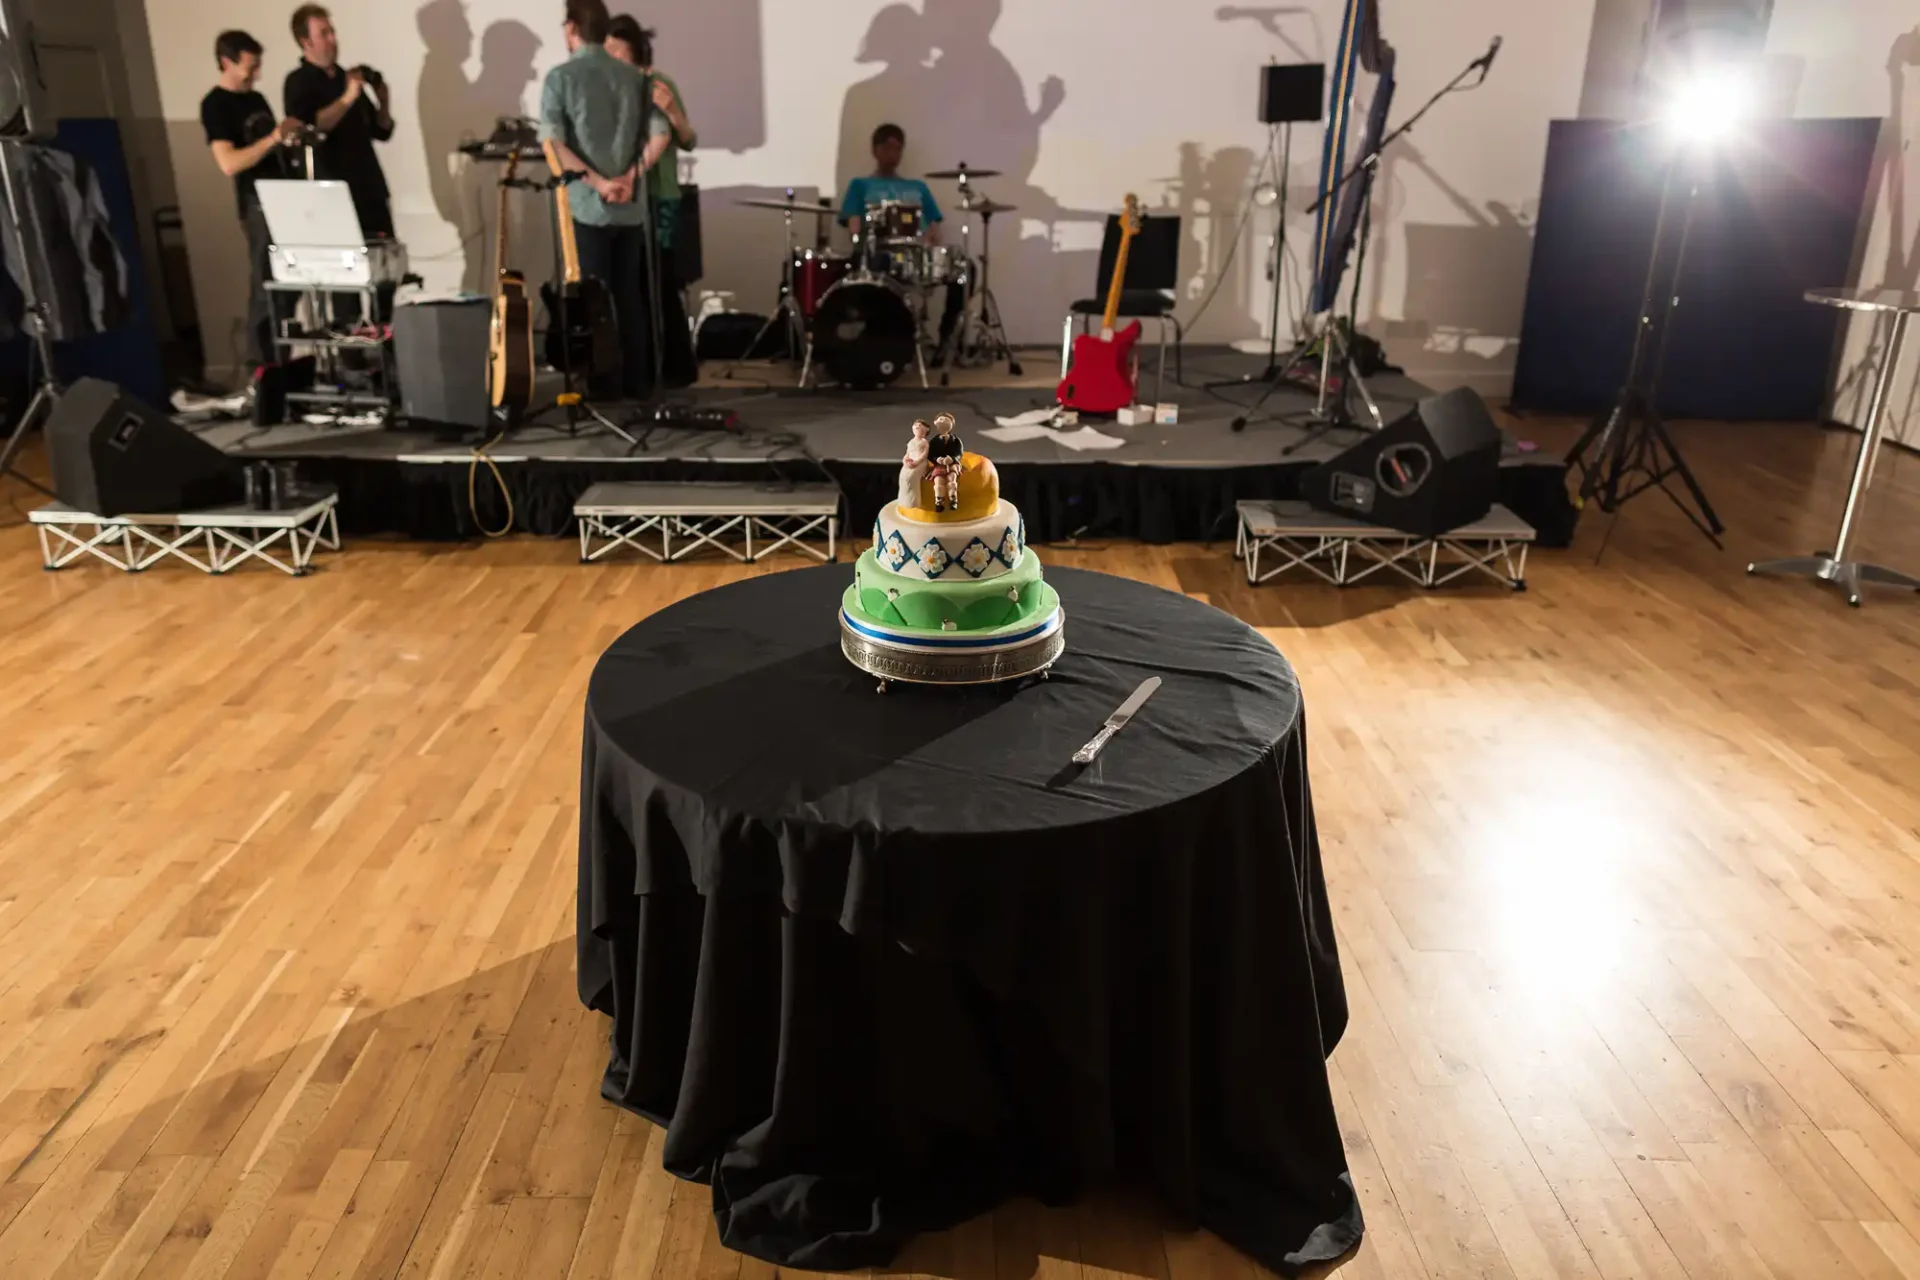 A wedding cake with a same-sex couple topper on a table, with a band performing in the background on a stage.